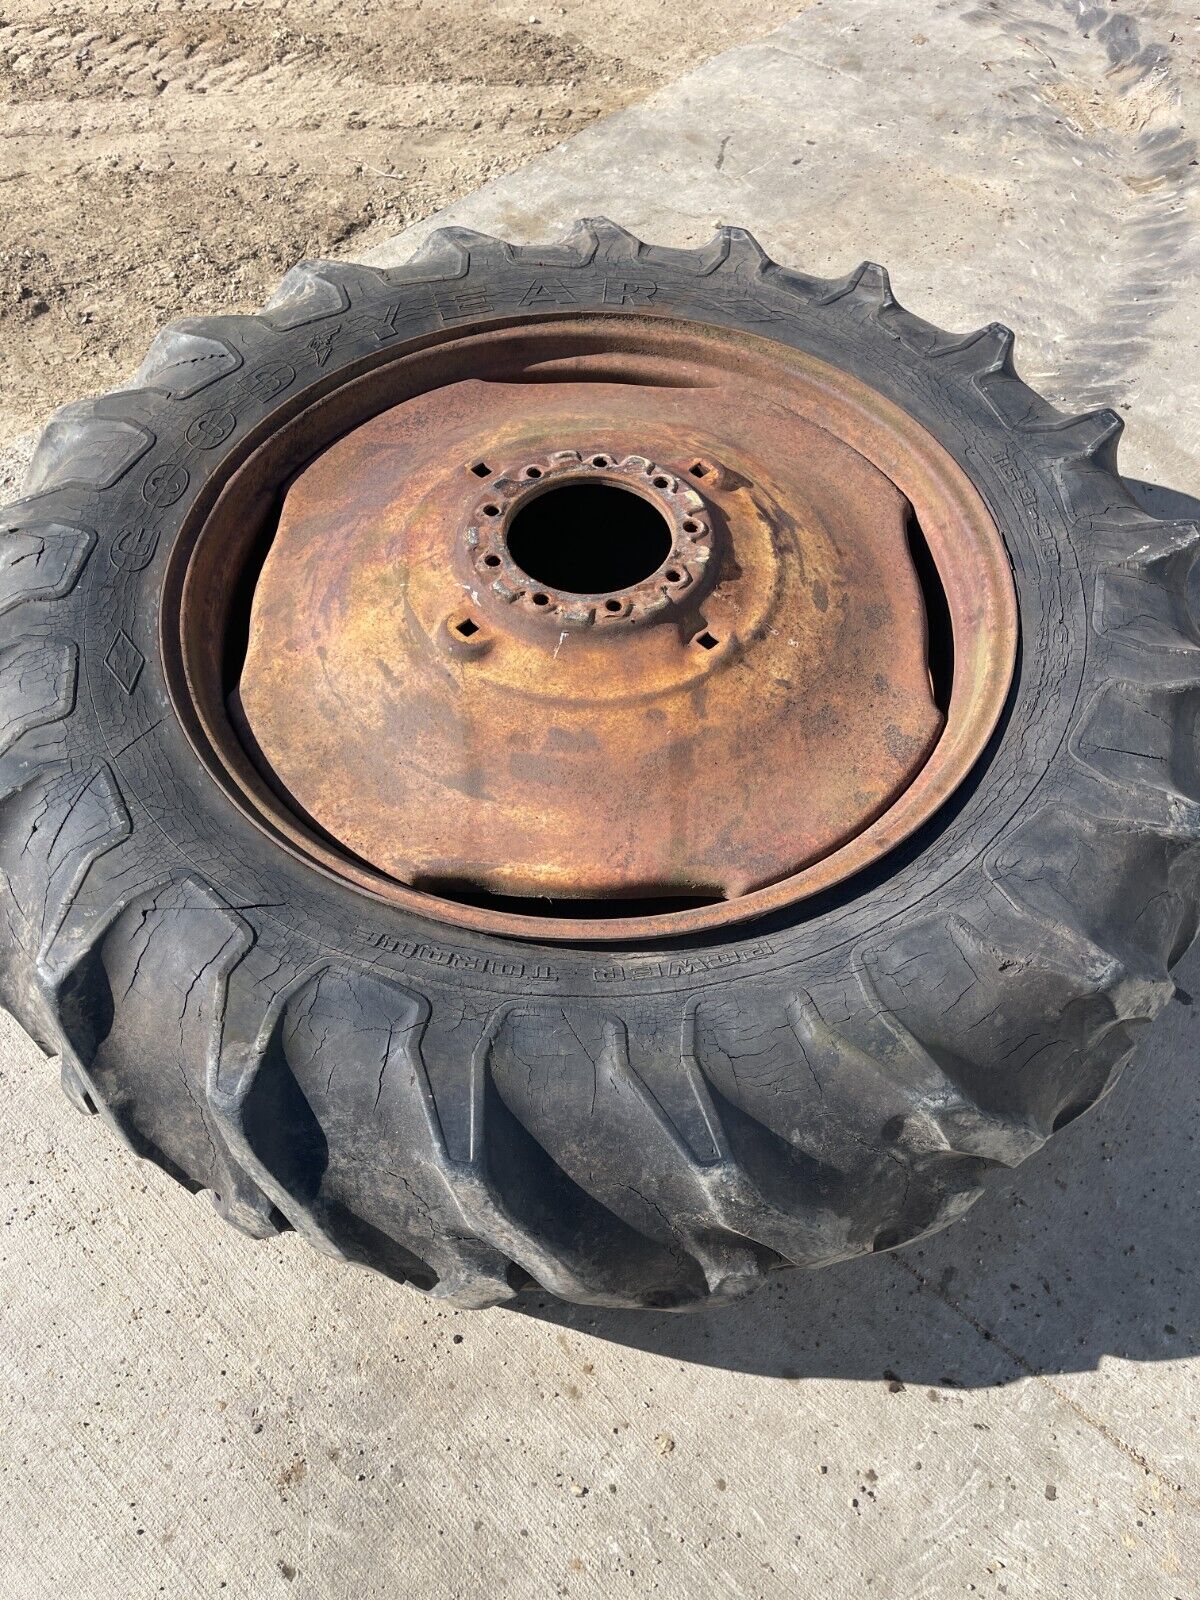 1967 Oliver 1850 Tractor 16.9-38 Goodyear Tire & 9 Bolt Pressed Rim